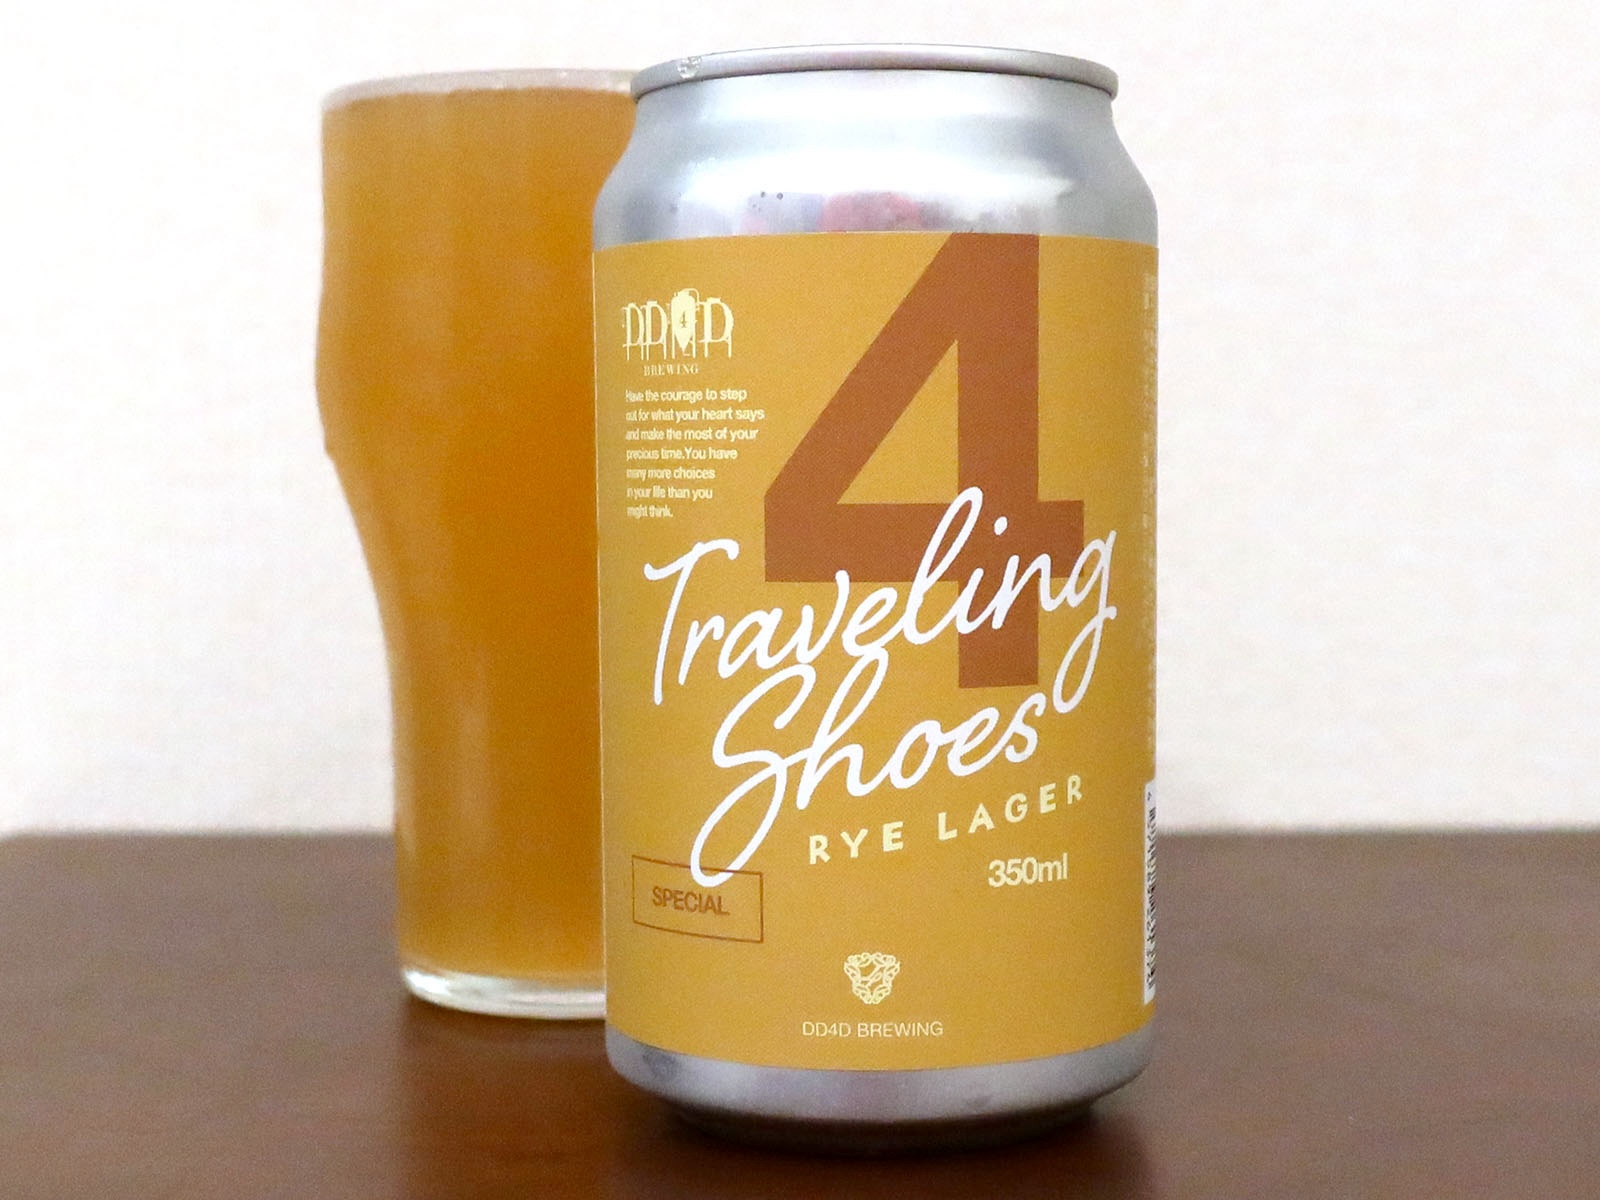 DD4D Brewing Traveling Shoes（Rye Lager）